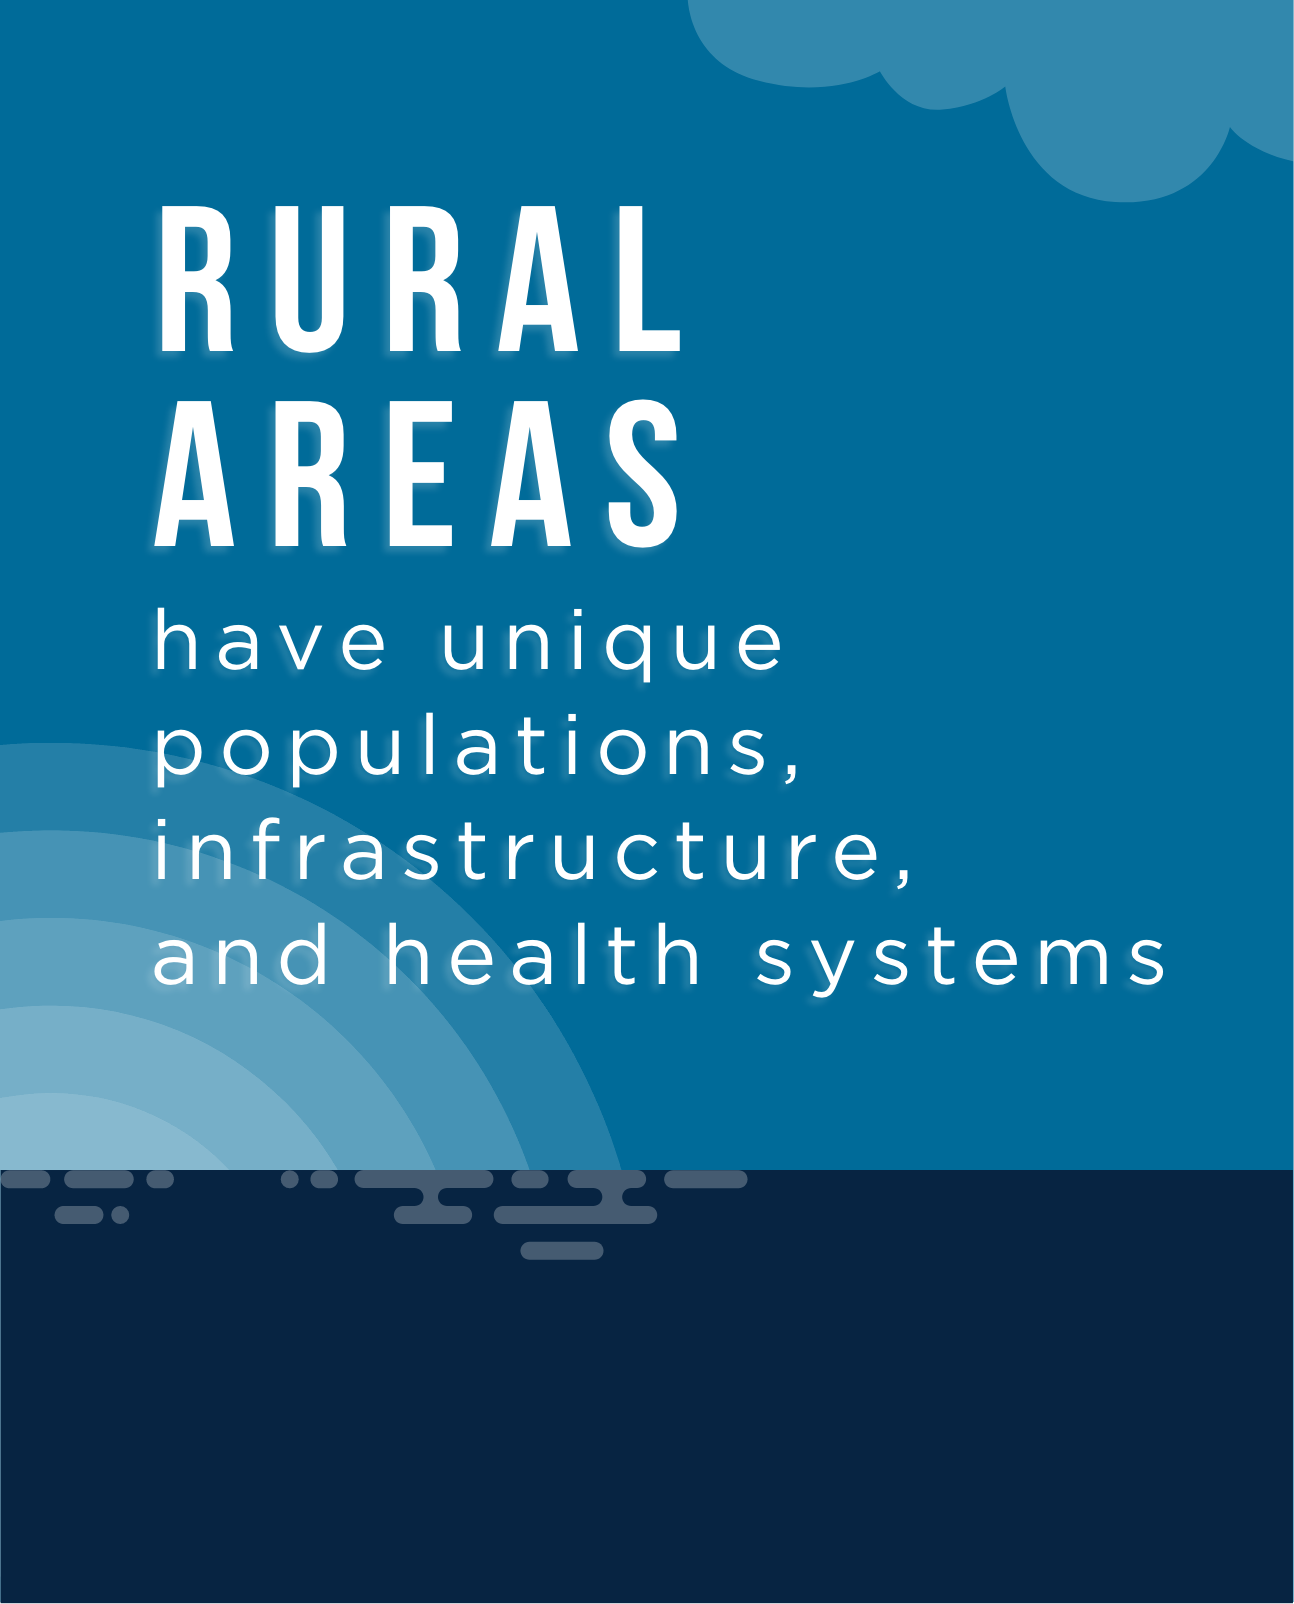 Rural areas have unique populations, infrastructure and health systems